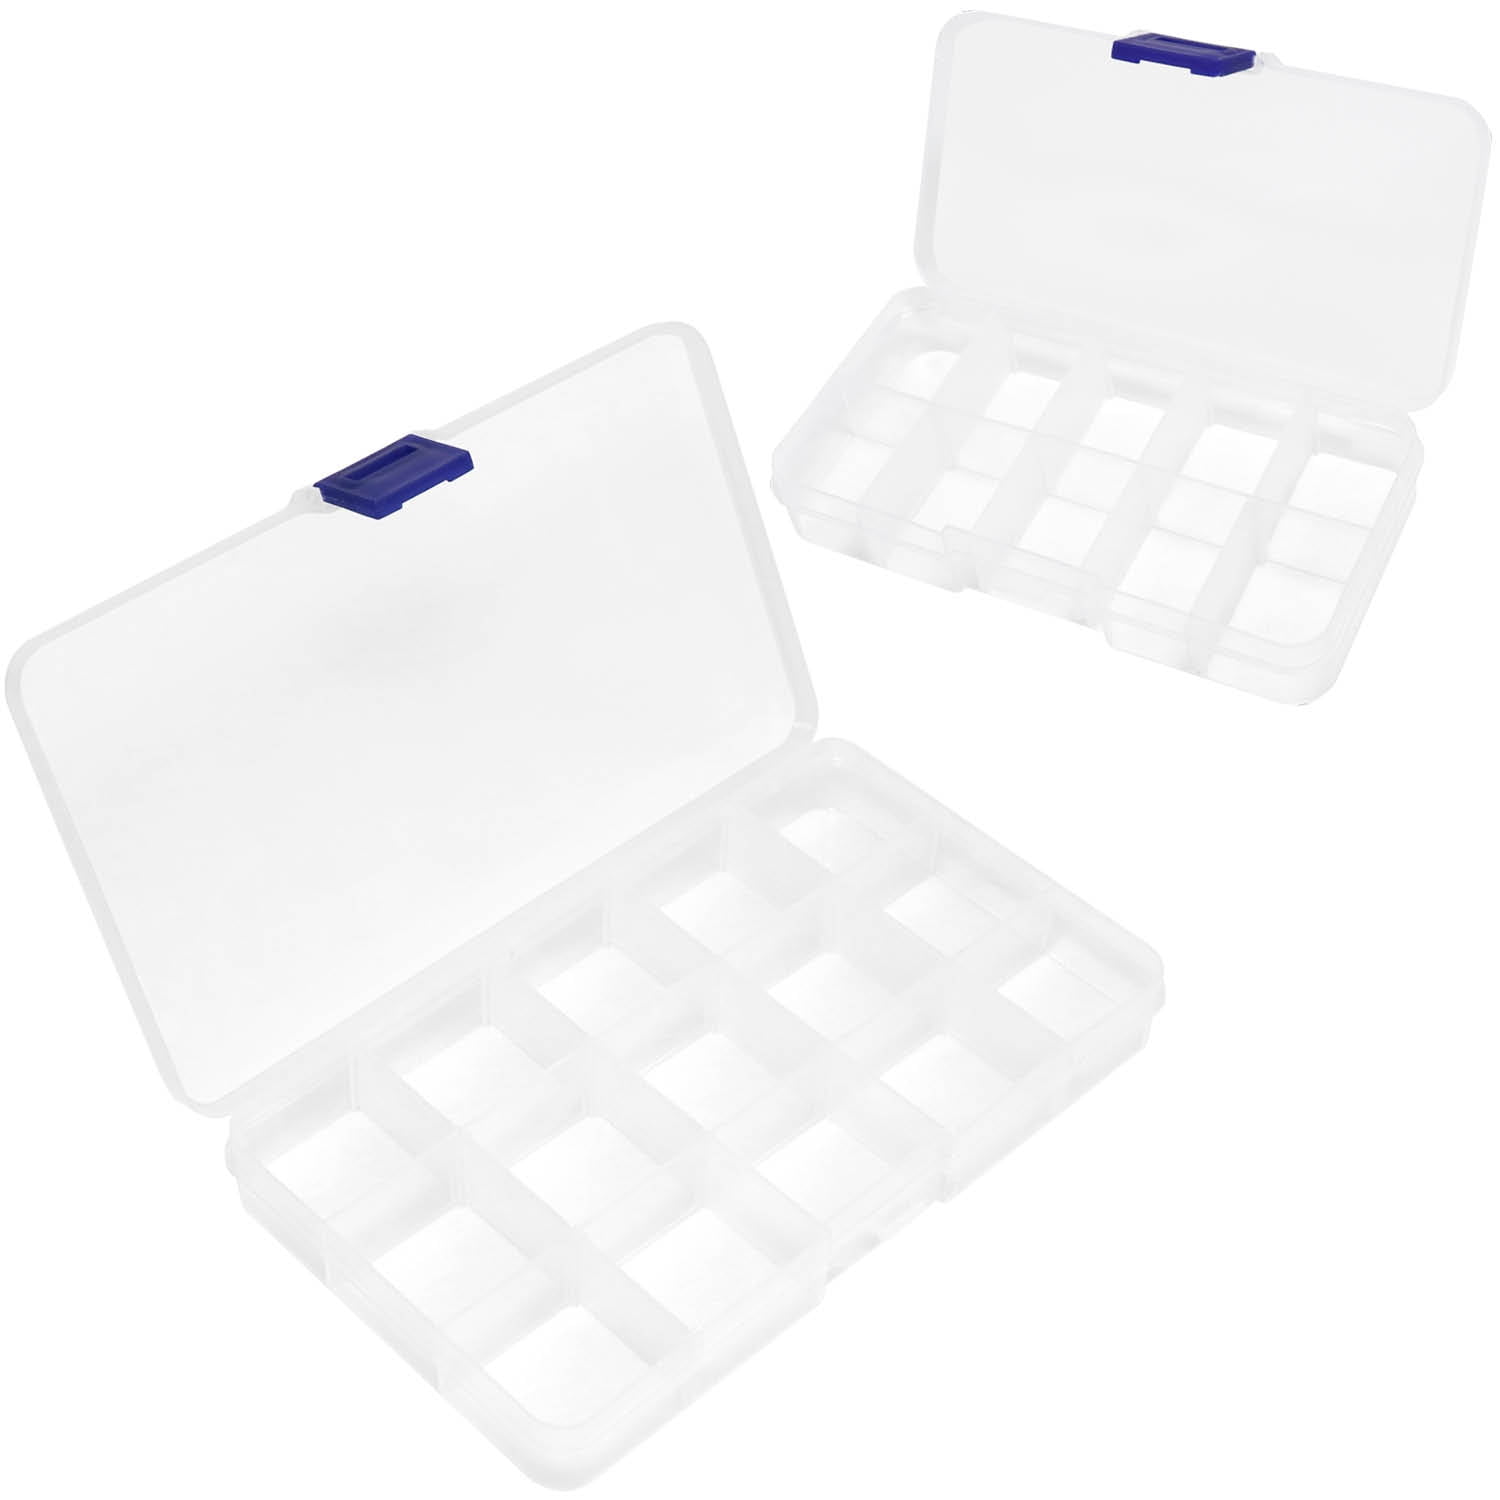 Hlotmeky Plastic Organizer Box with Dividers Bead Organizer 15 Large Grids  Tackle Box Organizer Clear Snackle Box Container